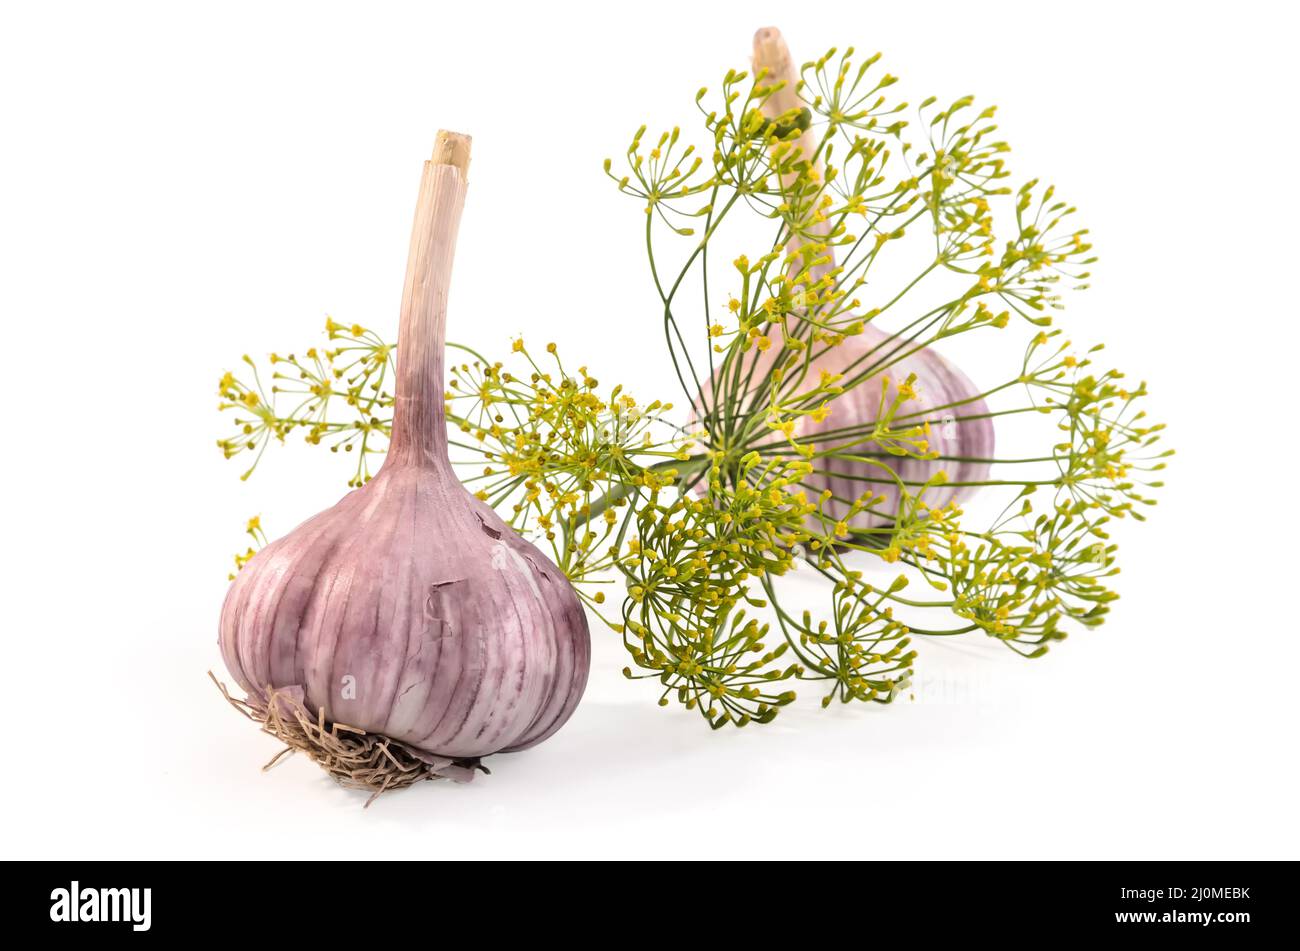 Garlic and a sprig of dill on a white background with soft shadow Stock Photo